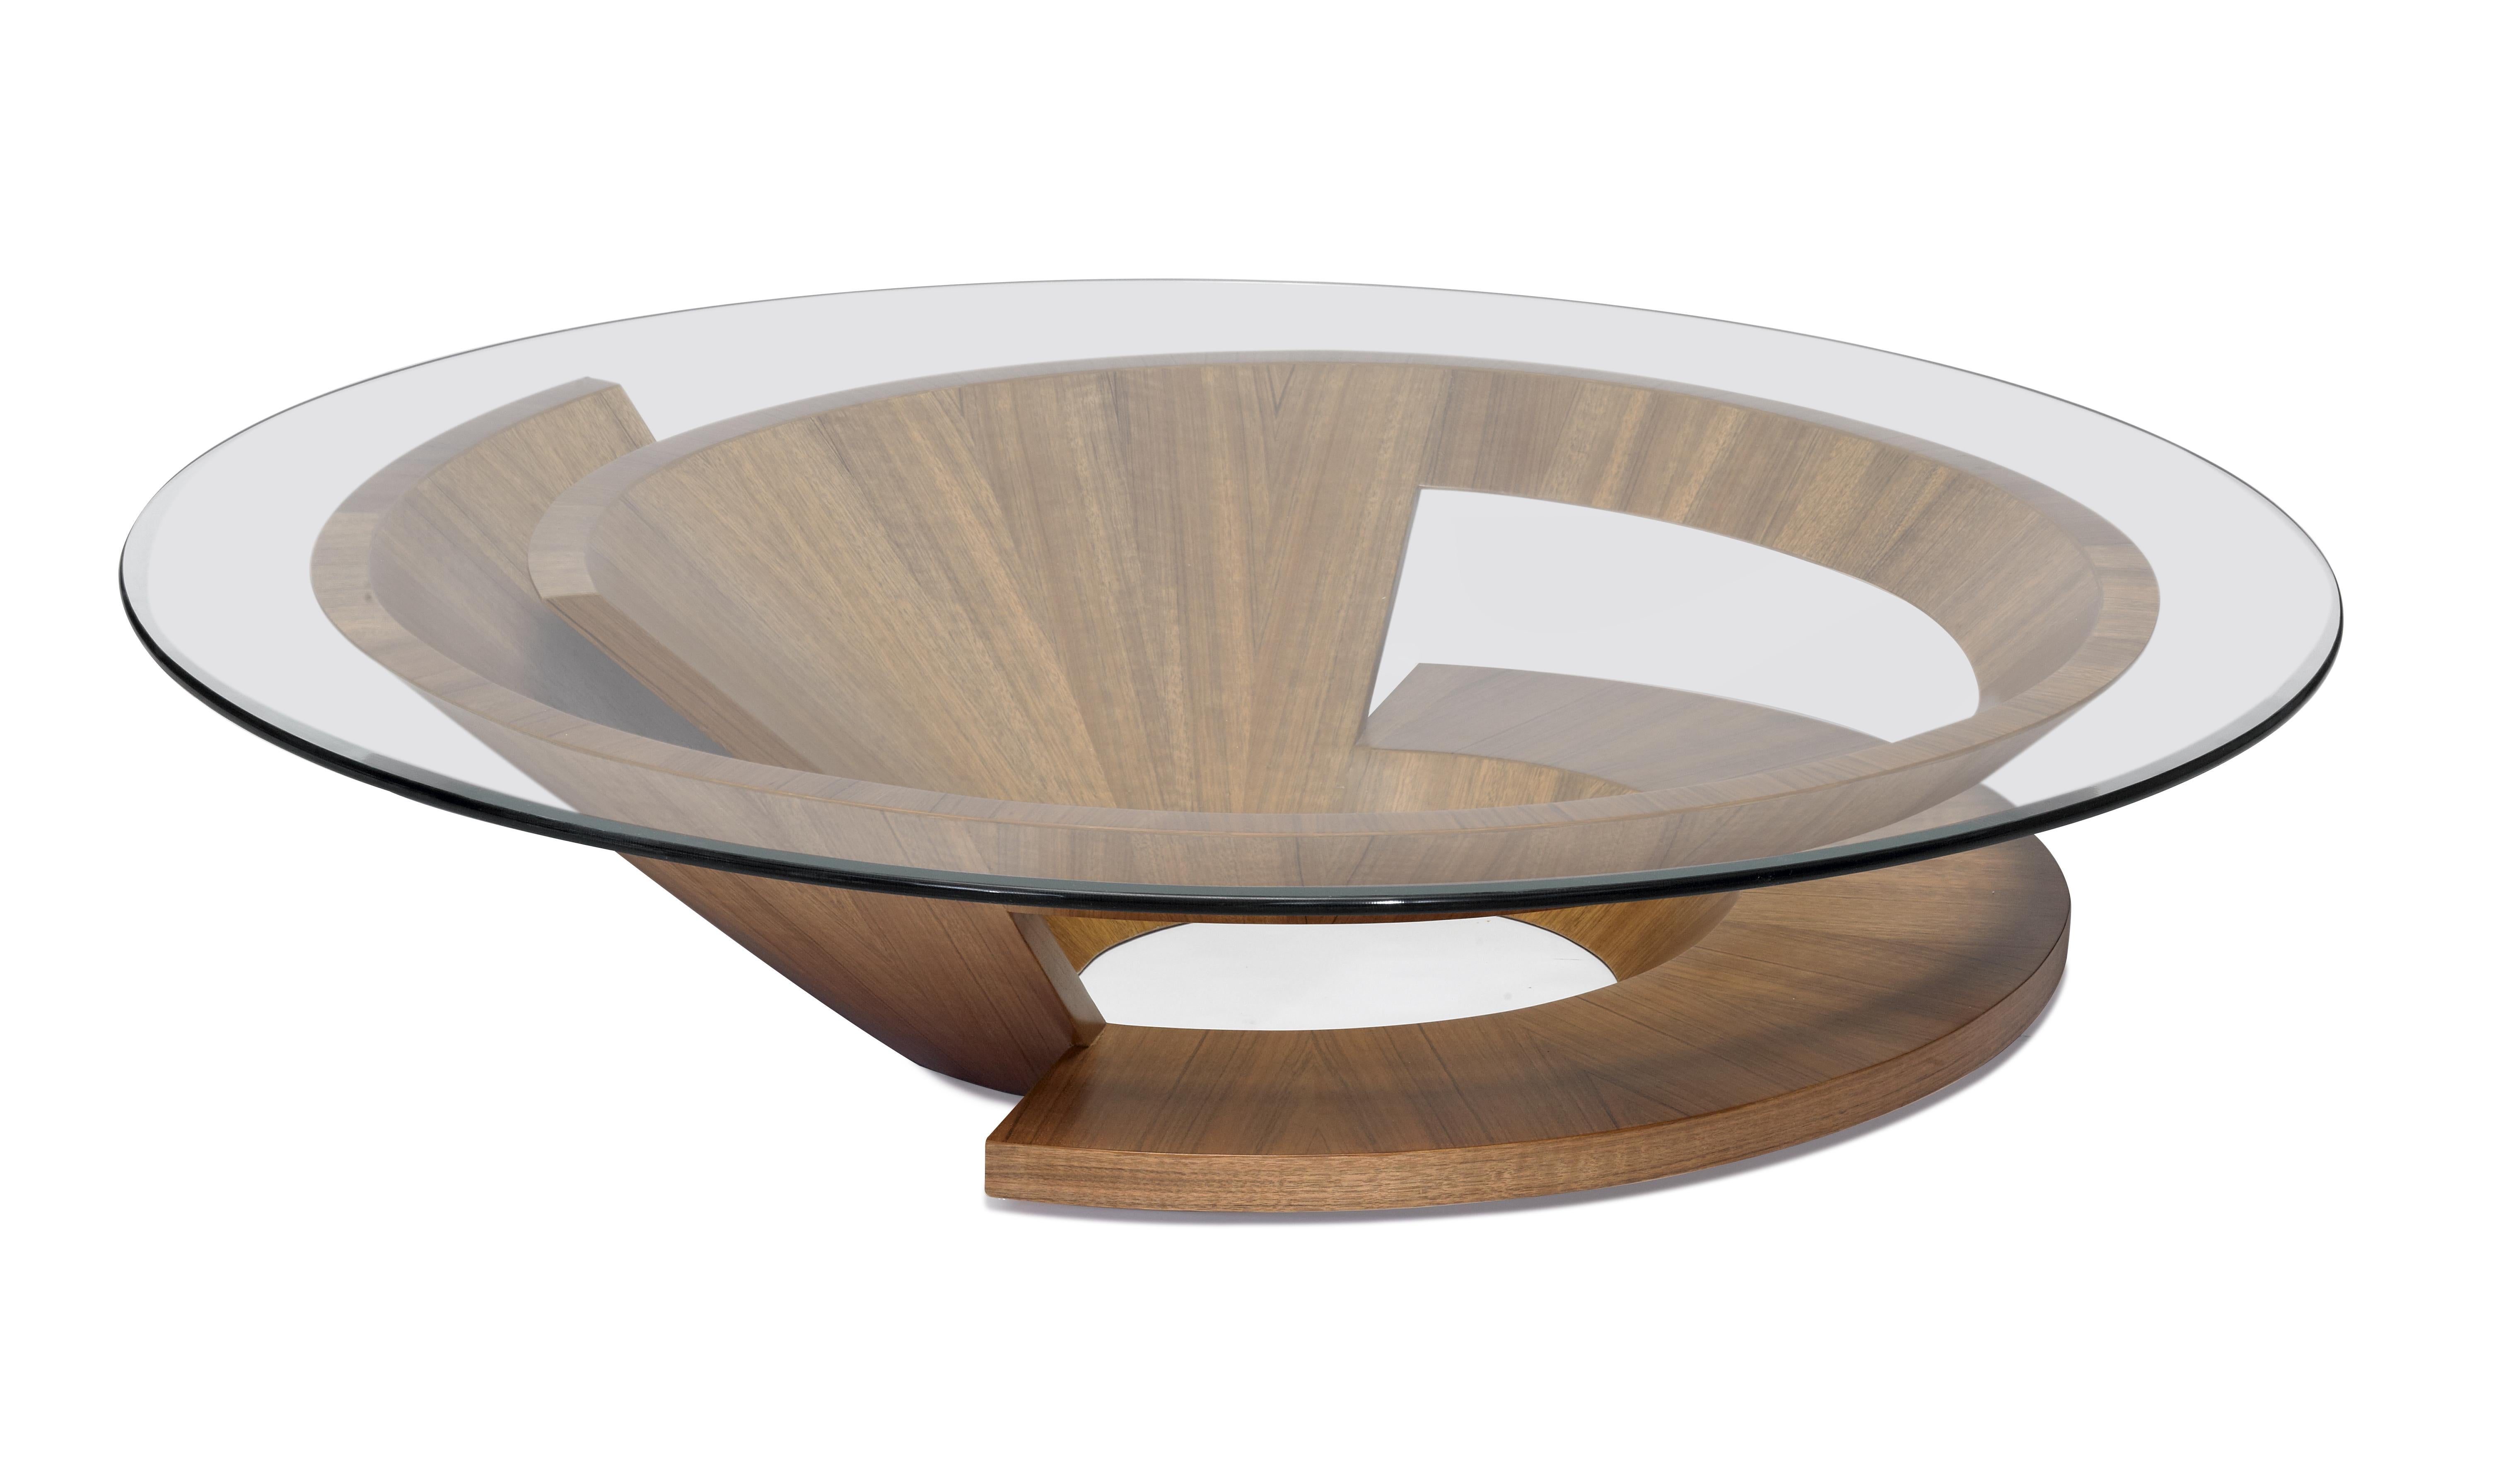 Maurice Barilone's design showcases a high-fashion look with concentric lines of Wenge, elegantly crowned with a round glass top. The meticulous arrangement of concentric lines in Wenge wood creates a visually captivating shapes that exudes